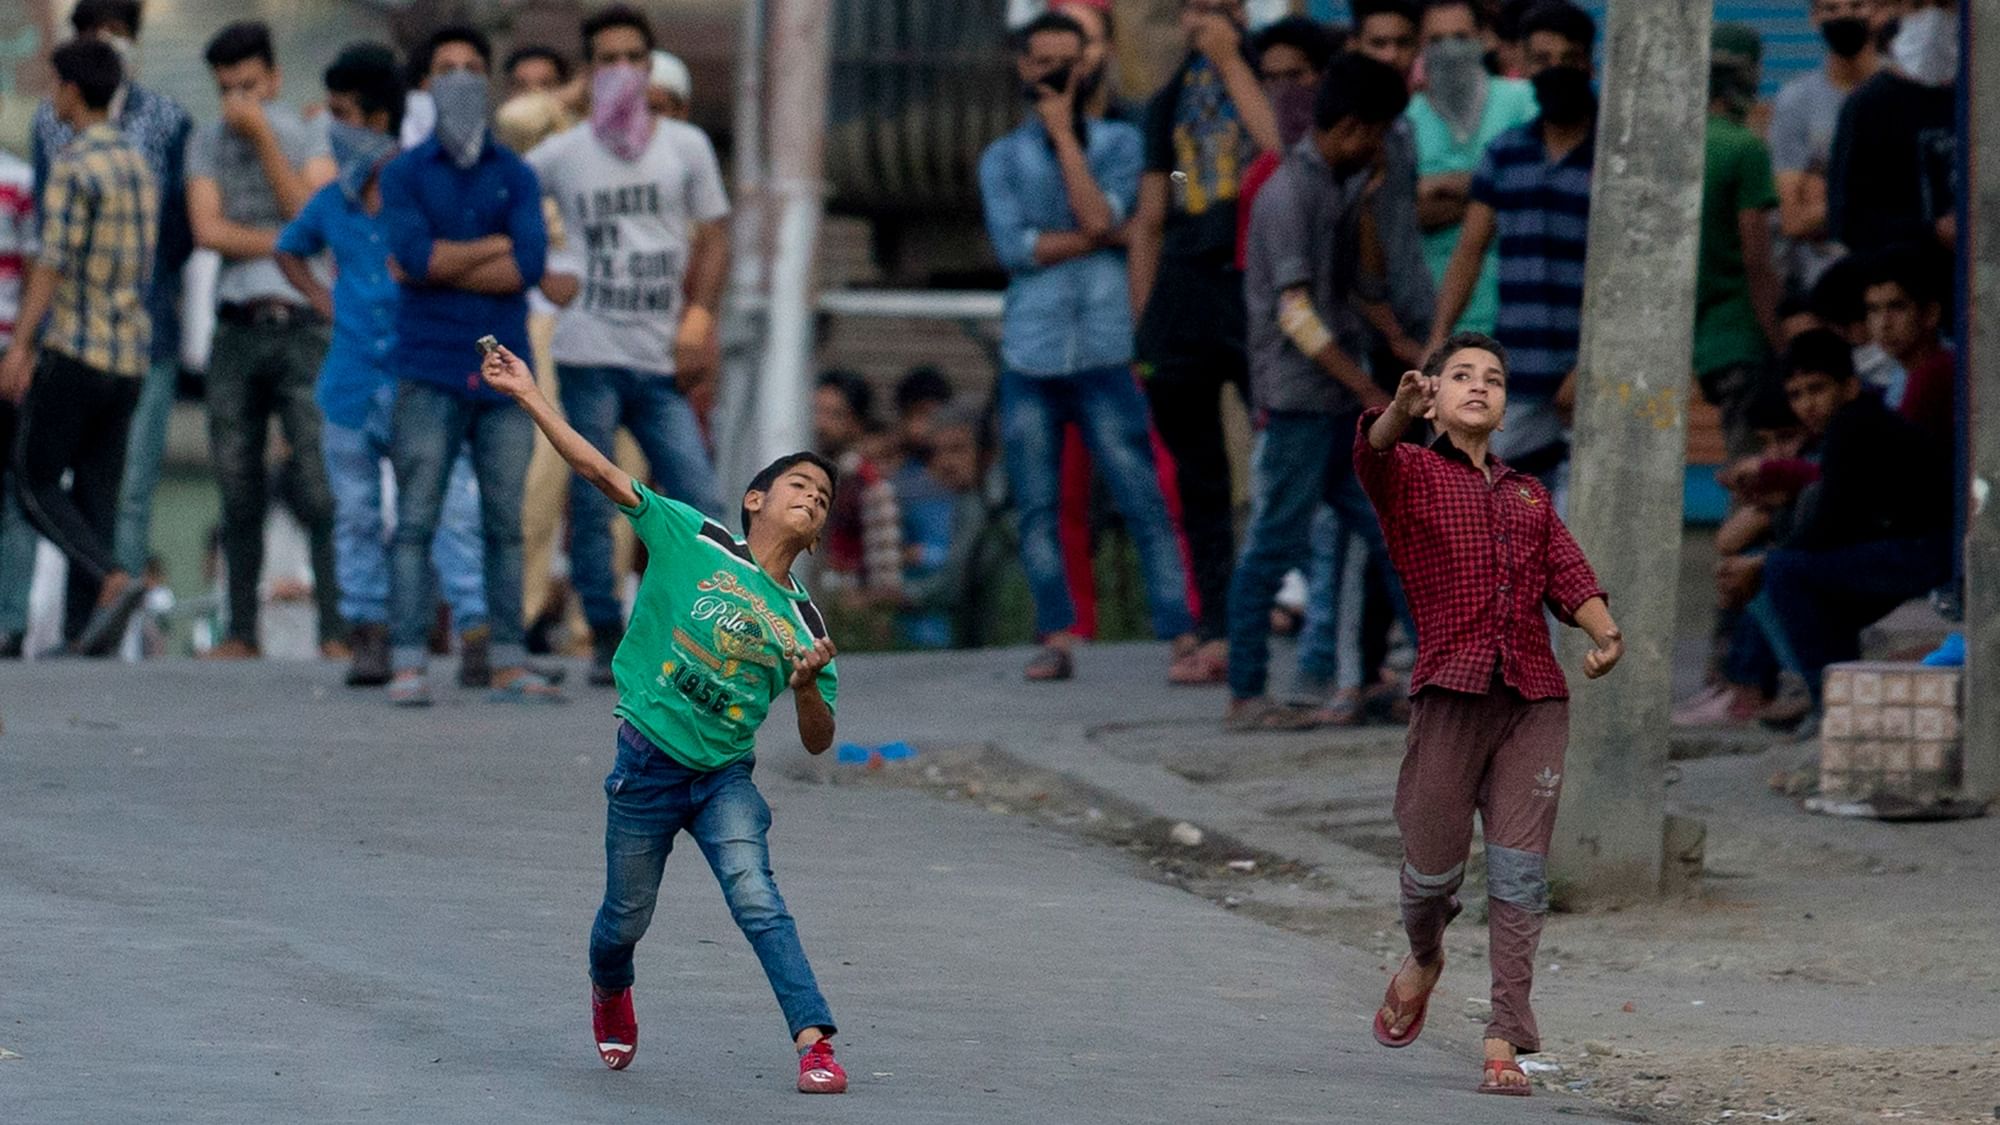 

Young Kashmiri protesters throw bricks and rocks at Indian securitymen during a protest in Srinagar, Indian controlled Kashmir, Saturday, July 16, 2016. (Photo: AP)